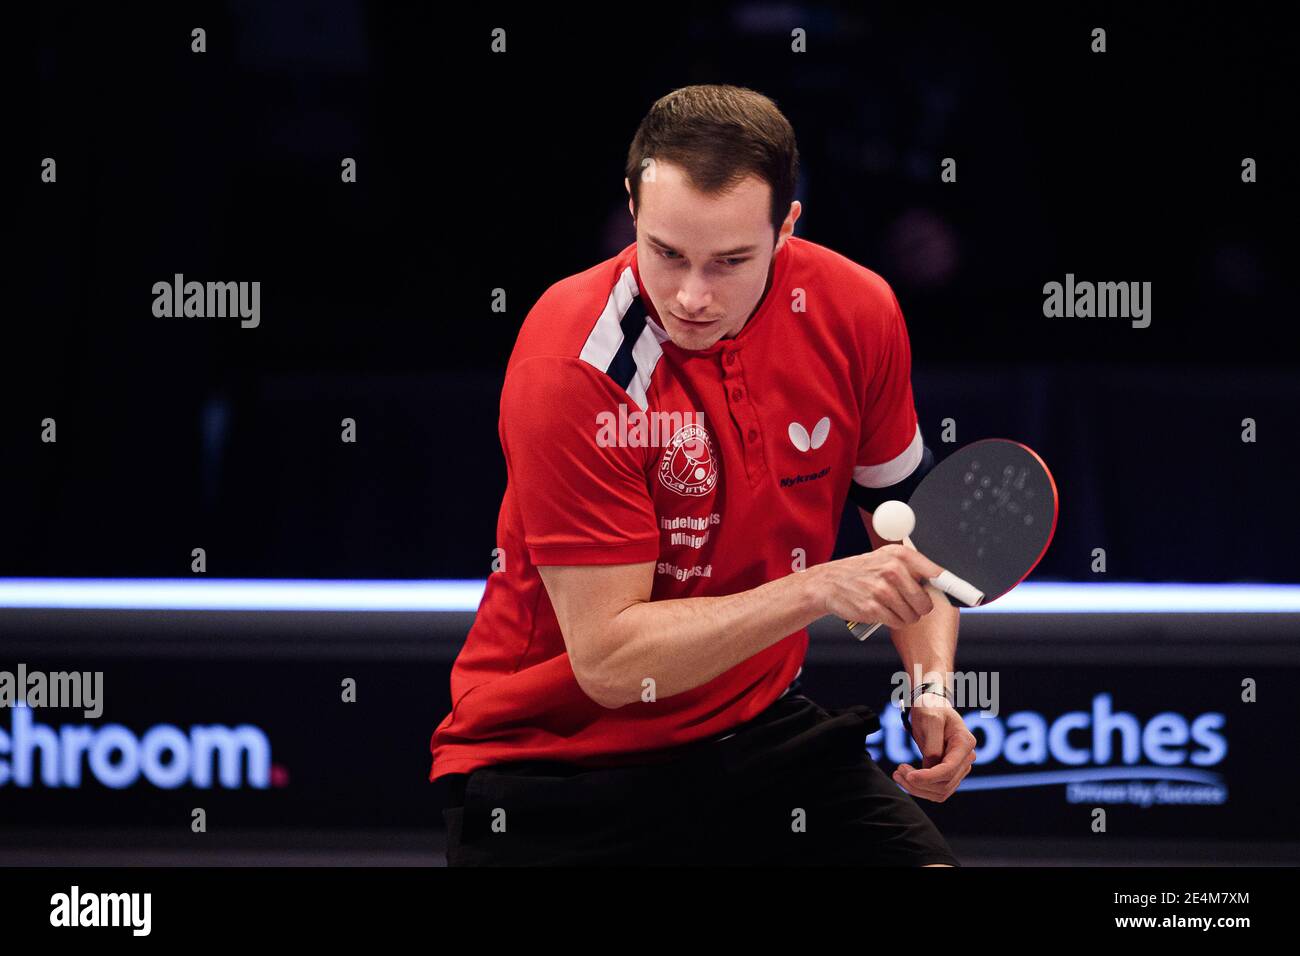 COVENTRY, UNITED KINGDOM. 24th Jan, 2021. Chris Doran (ENG) vs Benjamin Sorensen (DEN) during 2021 World Ping Pong Masters at Ricoh Arena on Sunday, January 24, 2021 in COVENTRY, ENGLAND. Credit: Taka G Wu/Alamy Live News Stock Photo